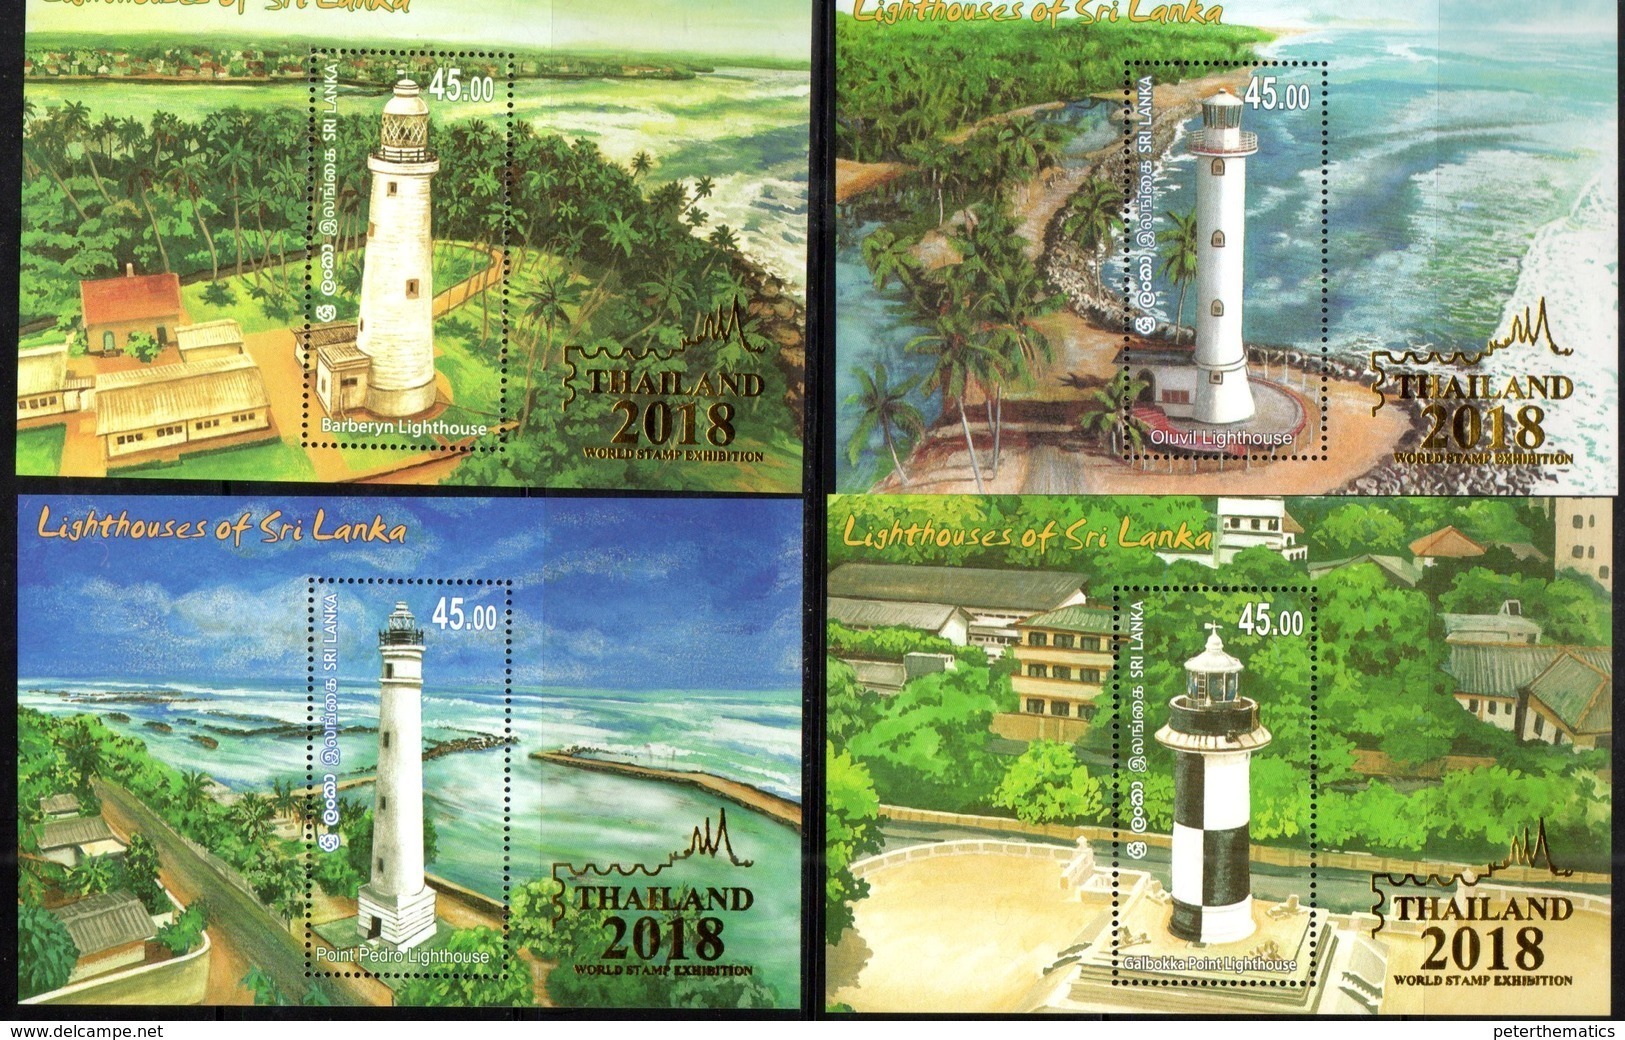 SRI LANKA , 2018, MNH, LIGHTHOUSES, 4 S/SHEETS WITH THAILAND EXHIBITION OVERPRINT - Lighthouses